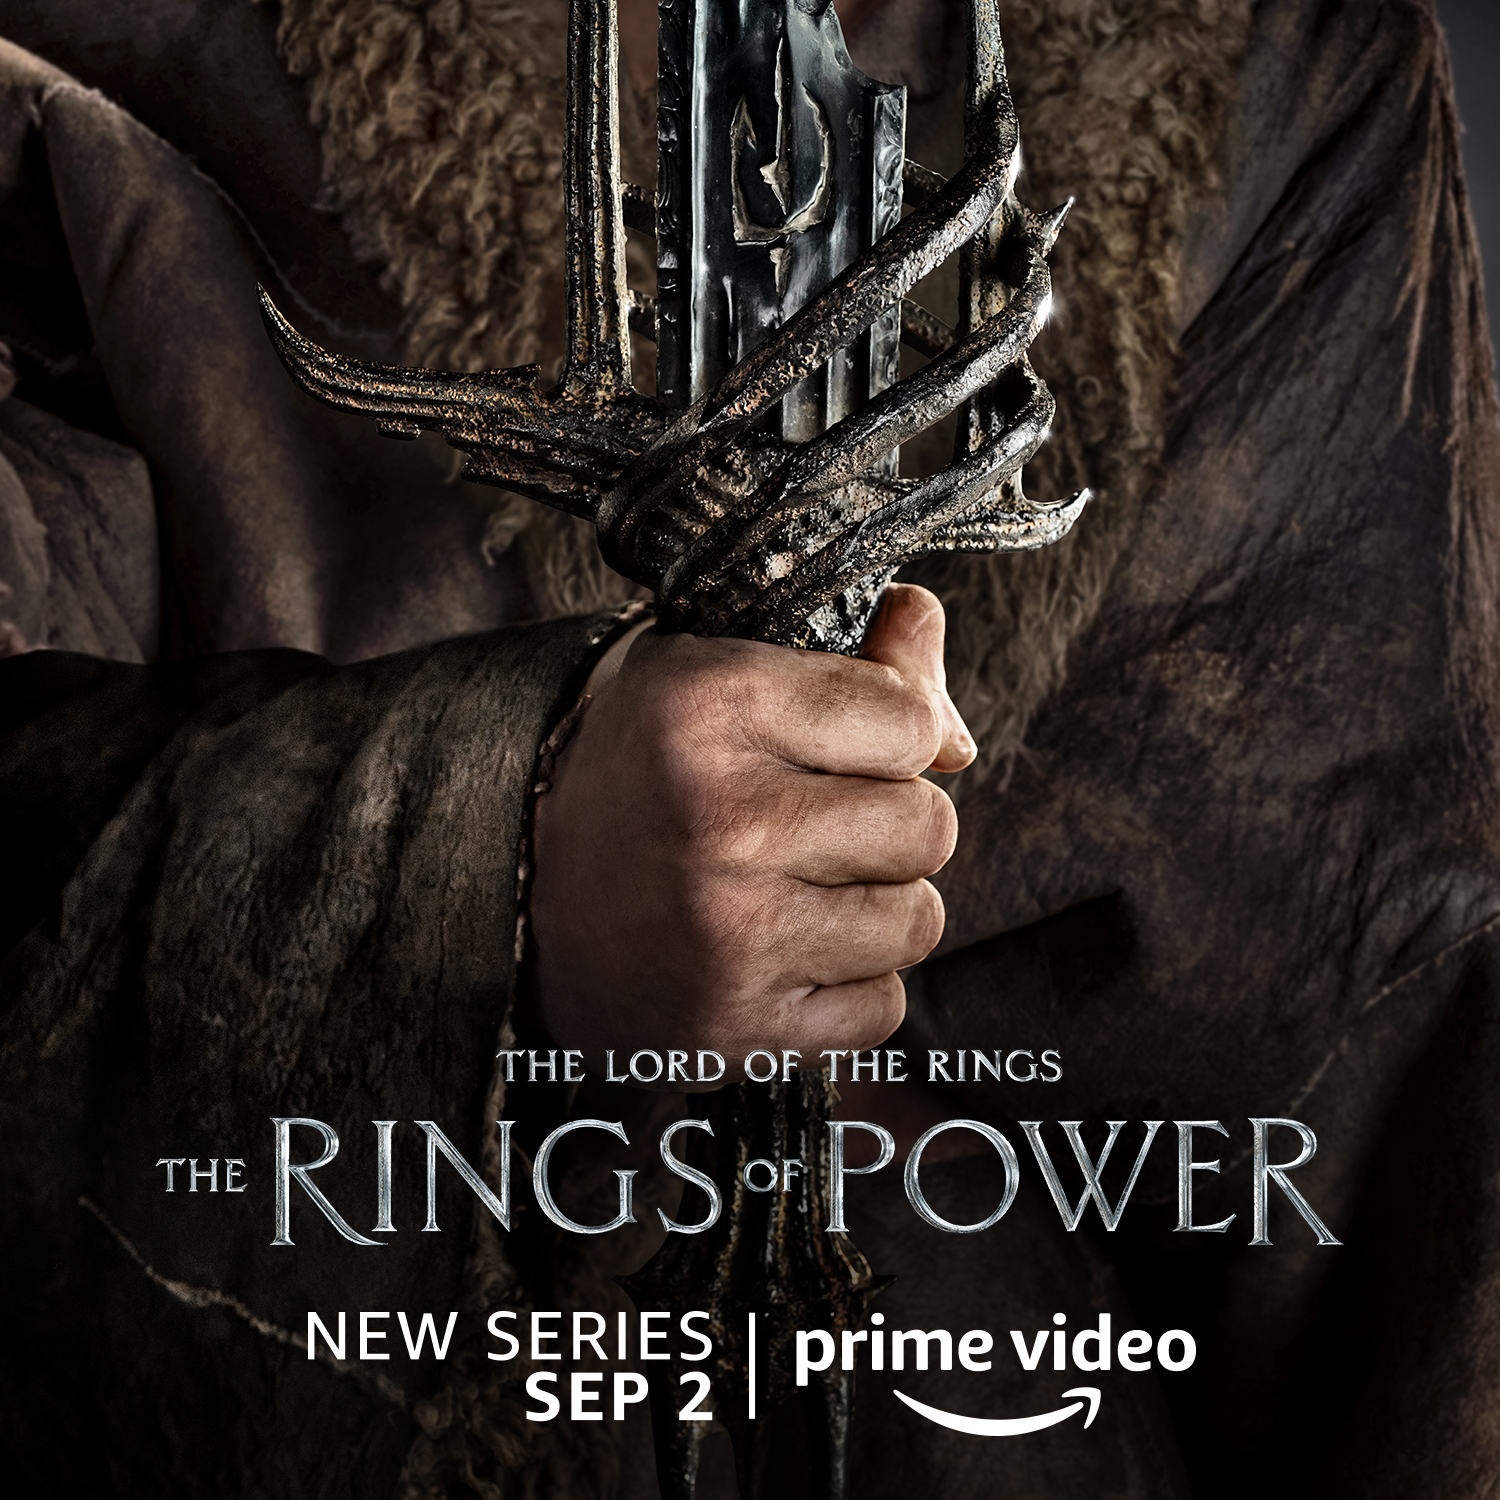 The Lord of the Rings The Rings of Power Prime Video Poster